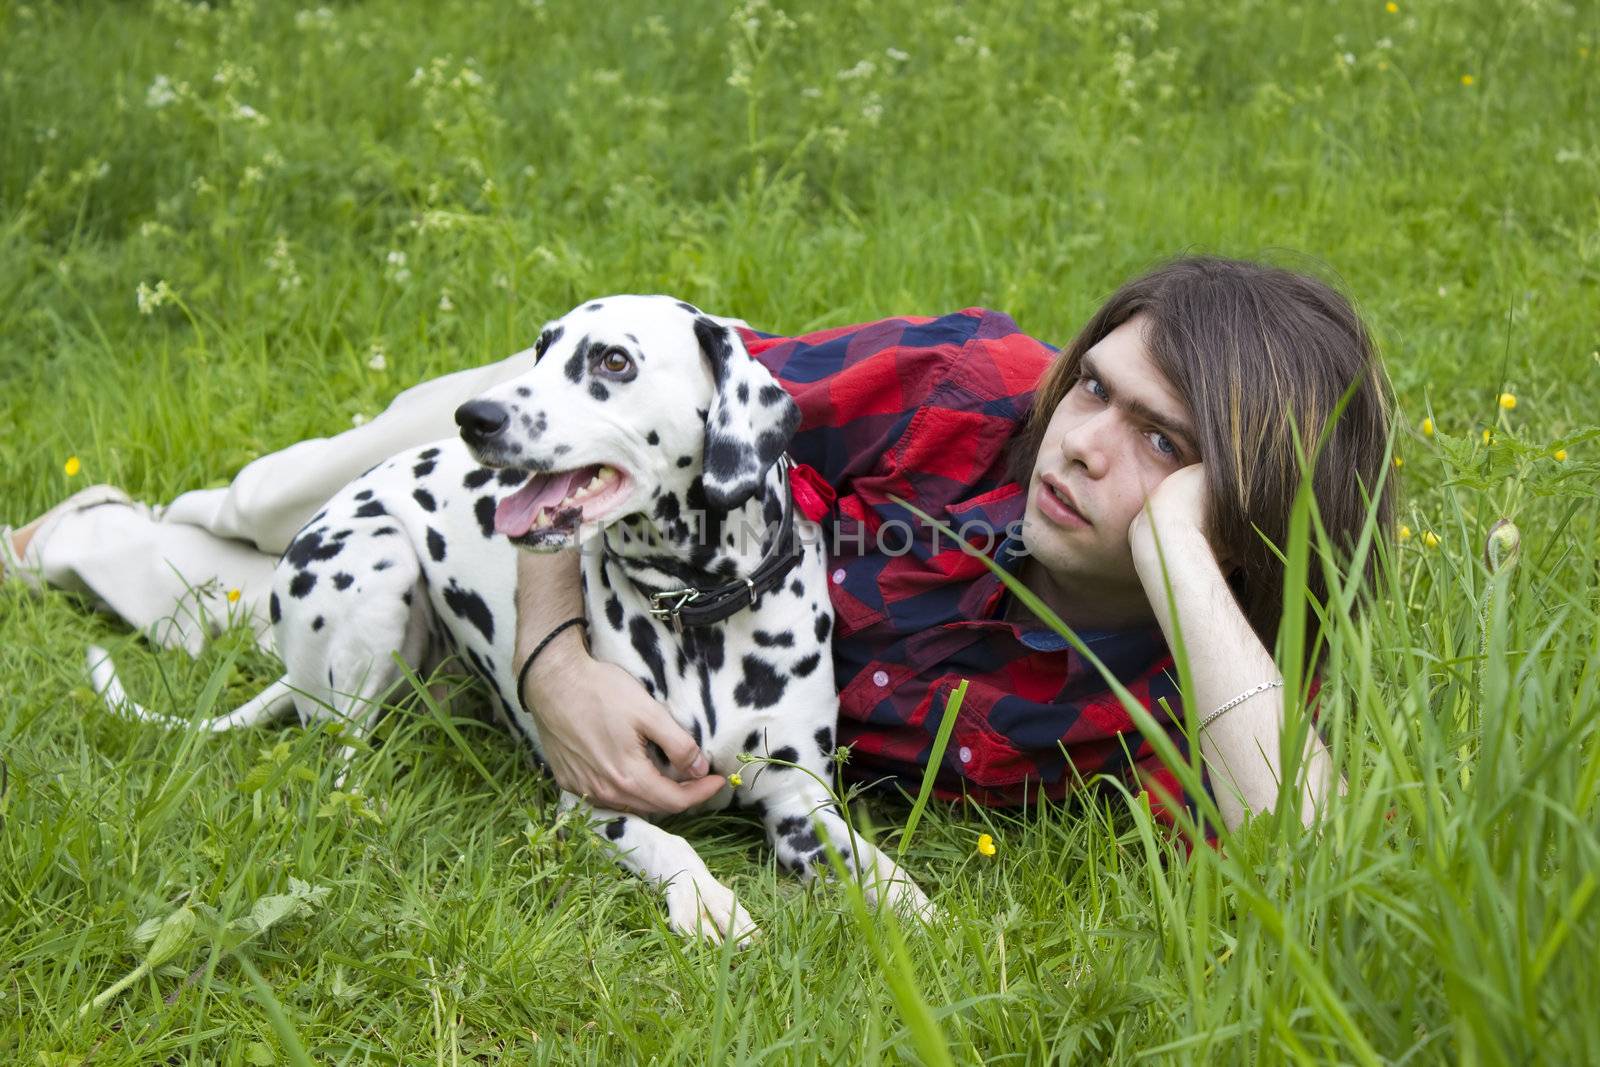 boy and the dalmatian dog on the grass by miradrozdowski